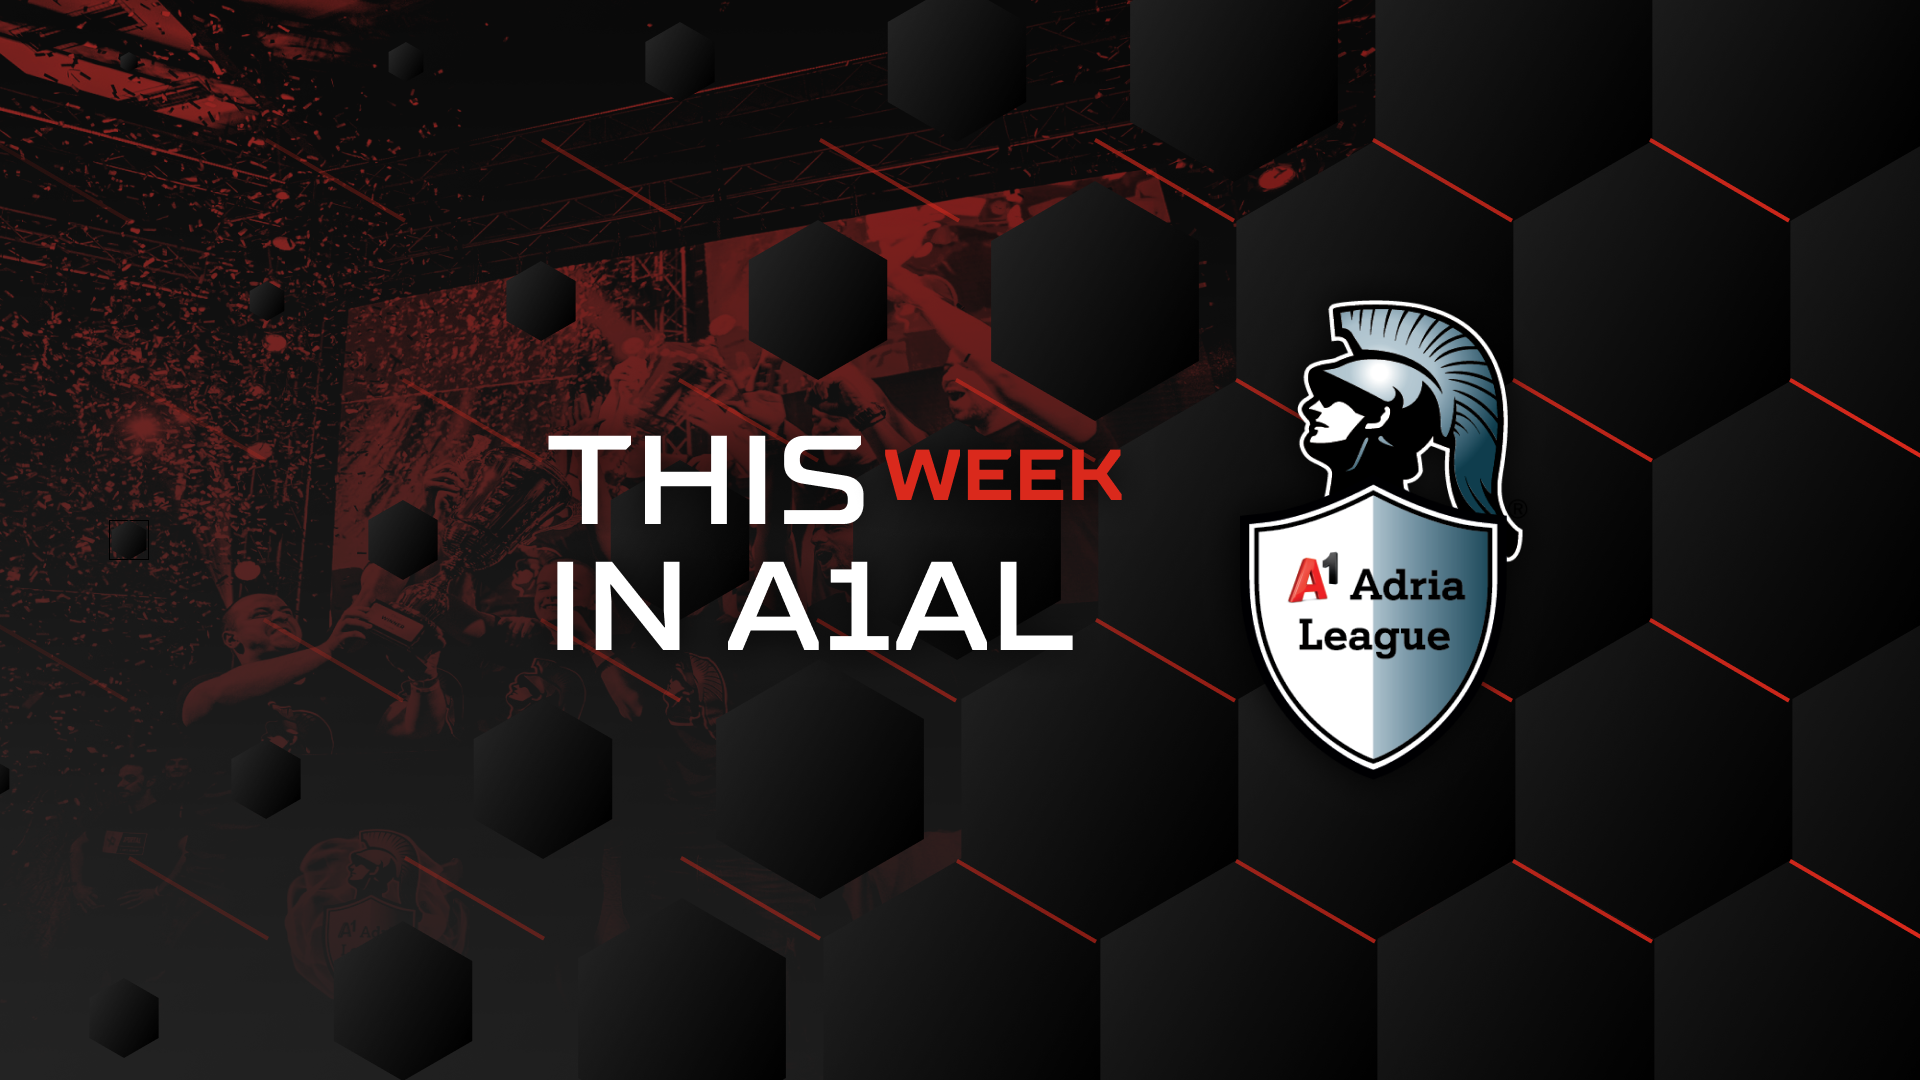 49% winrate are the first lower-bracket finalists! » A1 Adria League